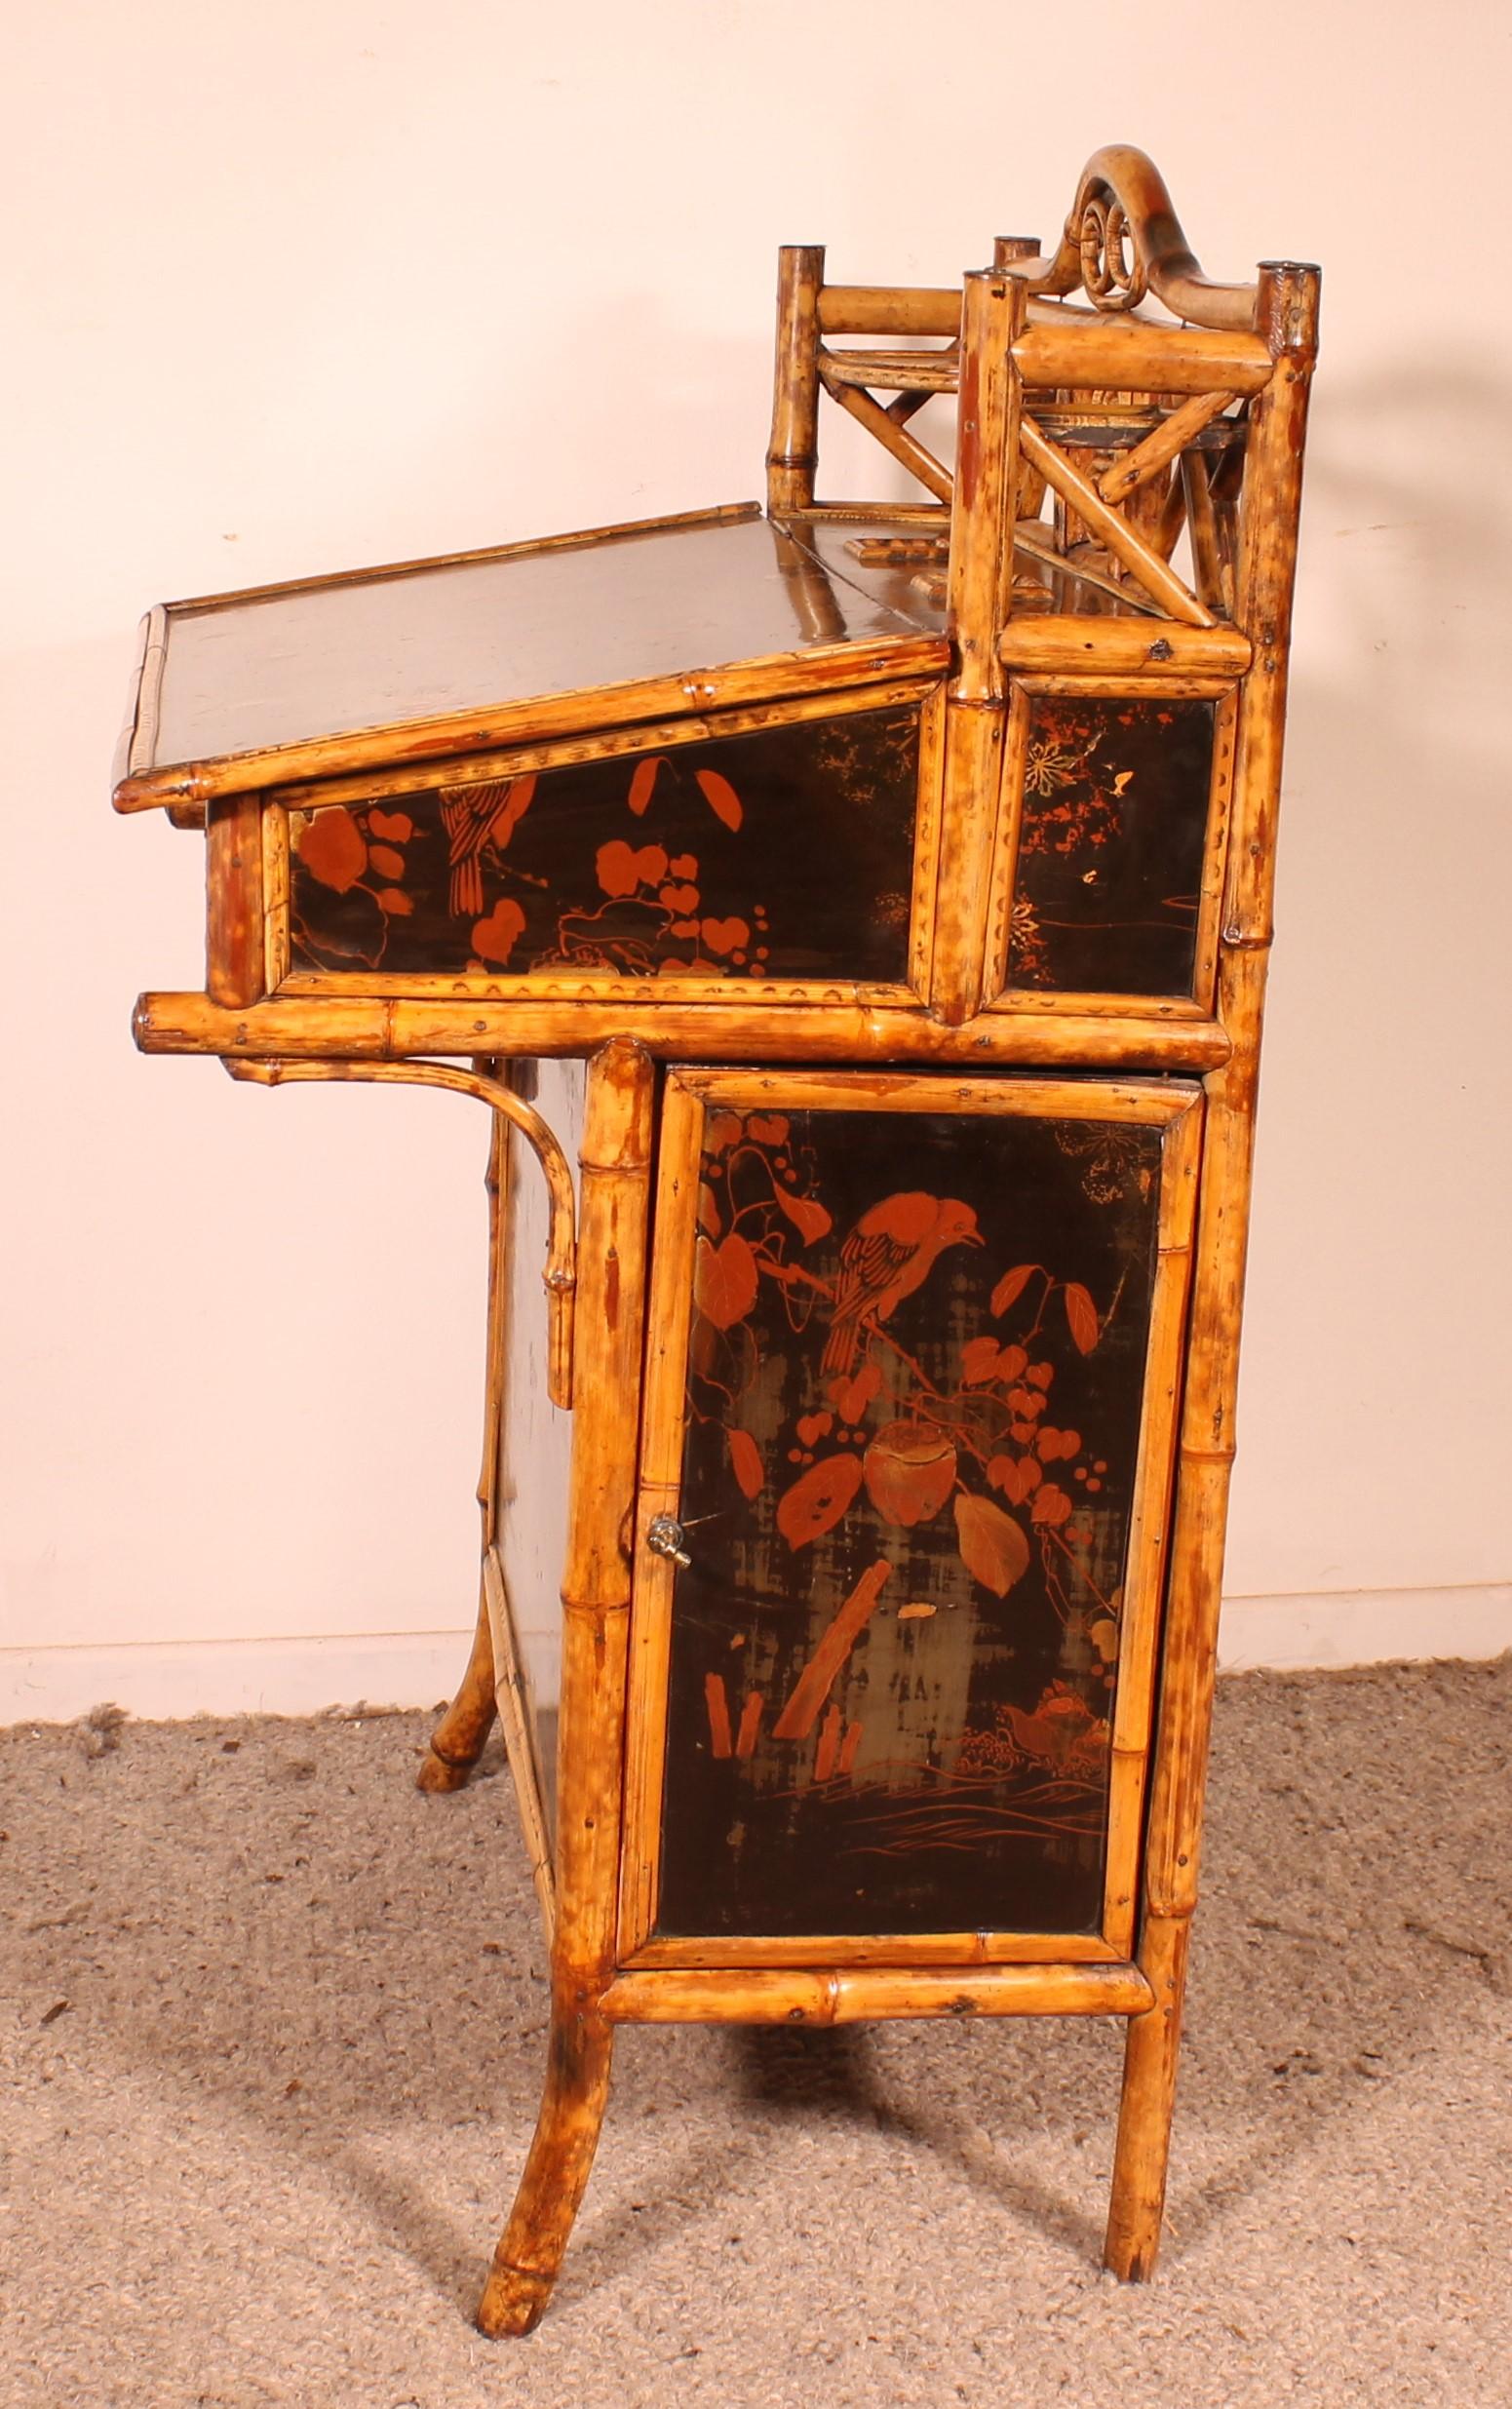 Secretary/davenport In Bamboo And Lacquer With Asian Decor - 19th Century For Sale 6